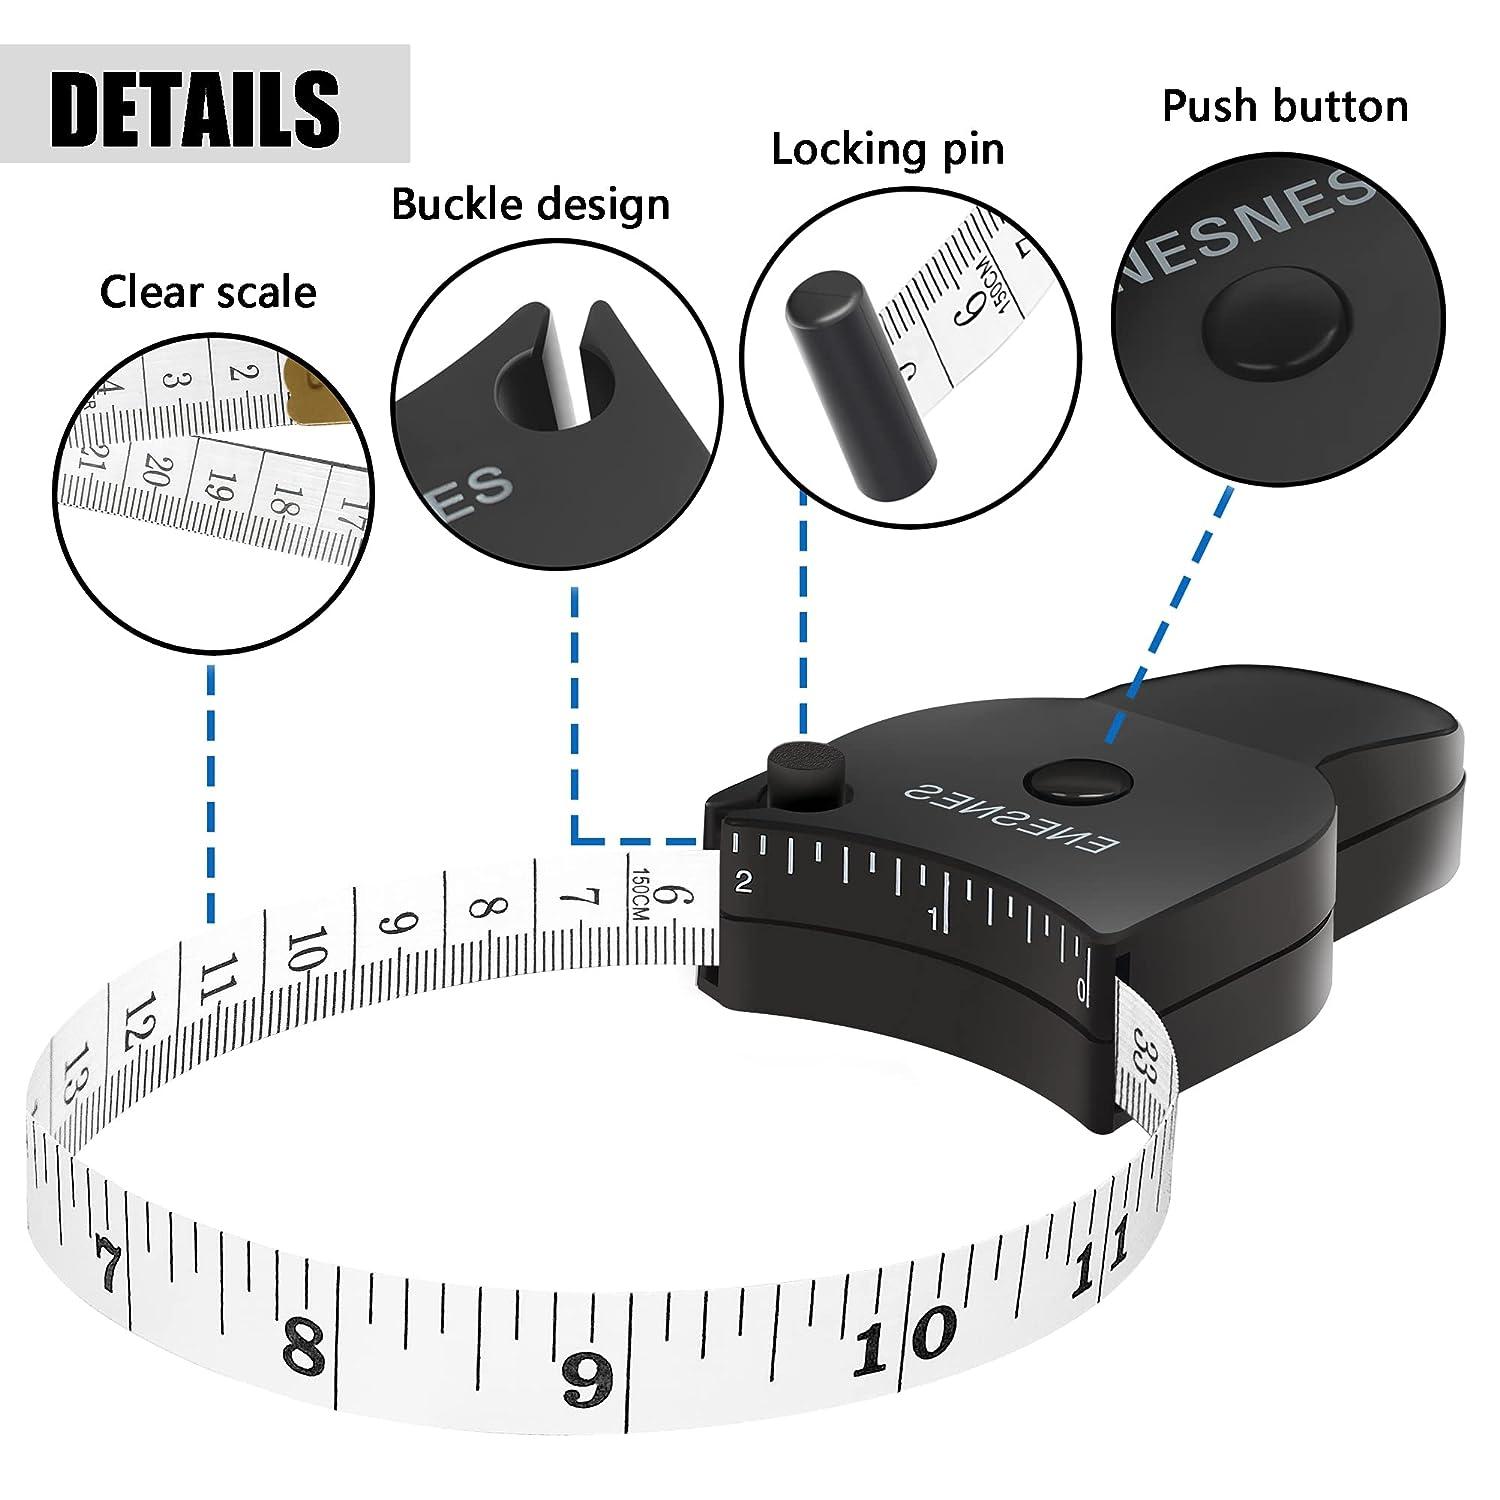 Vamor Body Measuring Tape 60 Inch Weight Loss Retractable Measure Tape with  Lock Pin and Push Button for Fitness, Tailor, Sewing (Black/White)